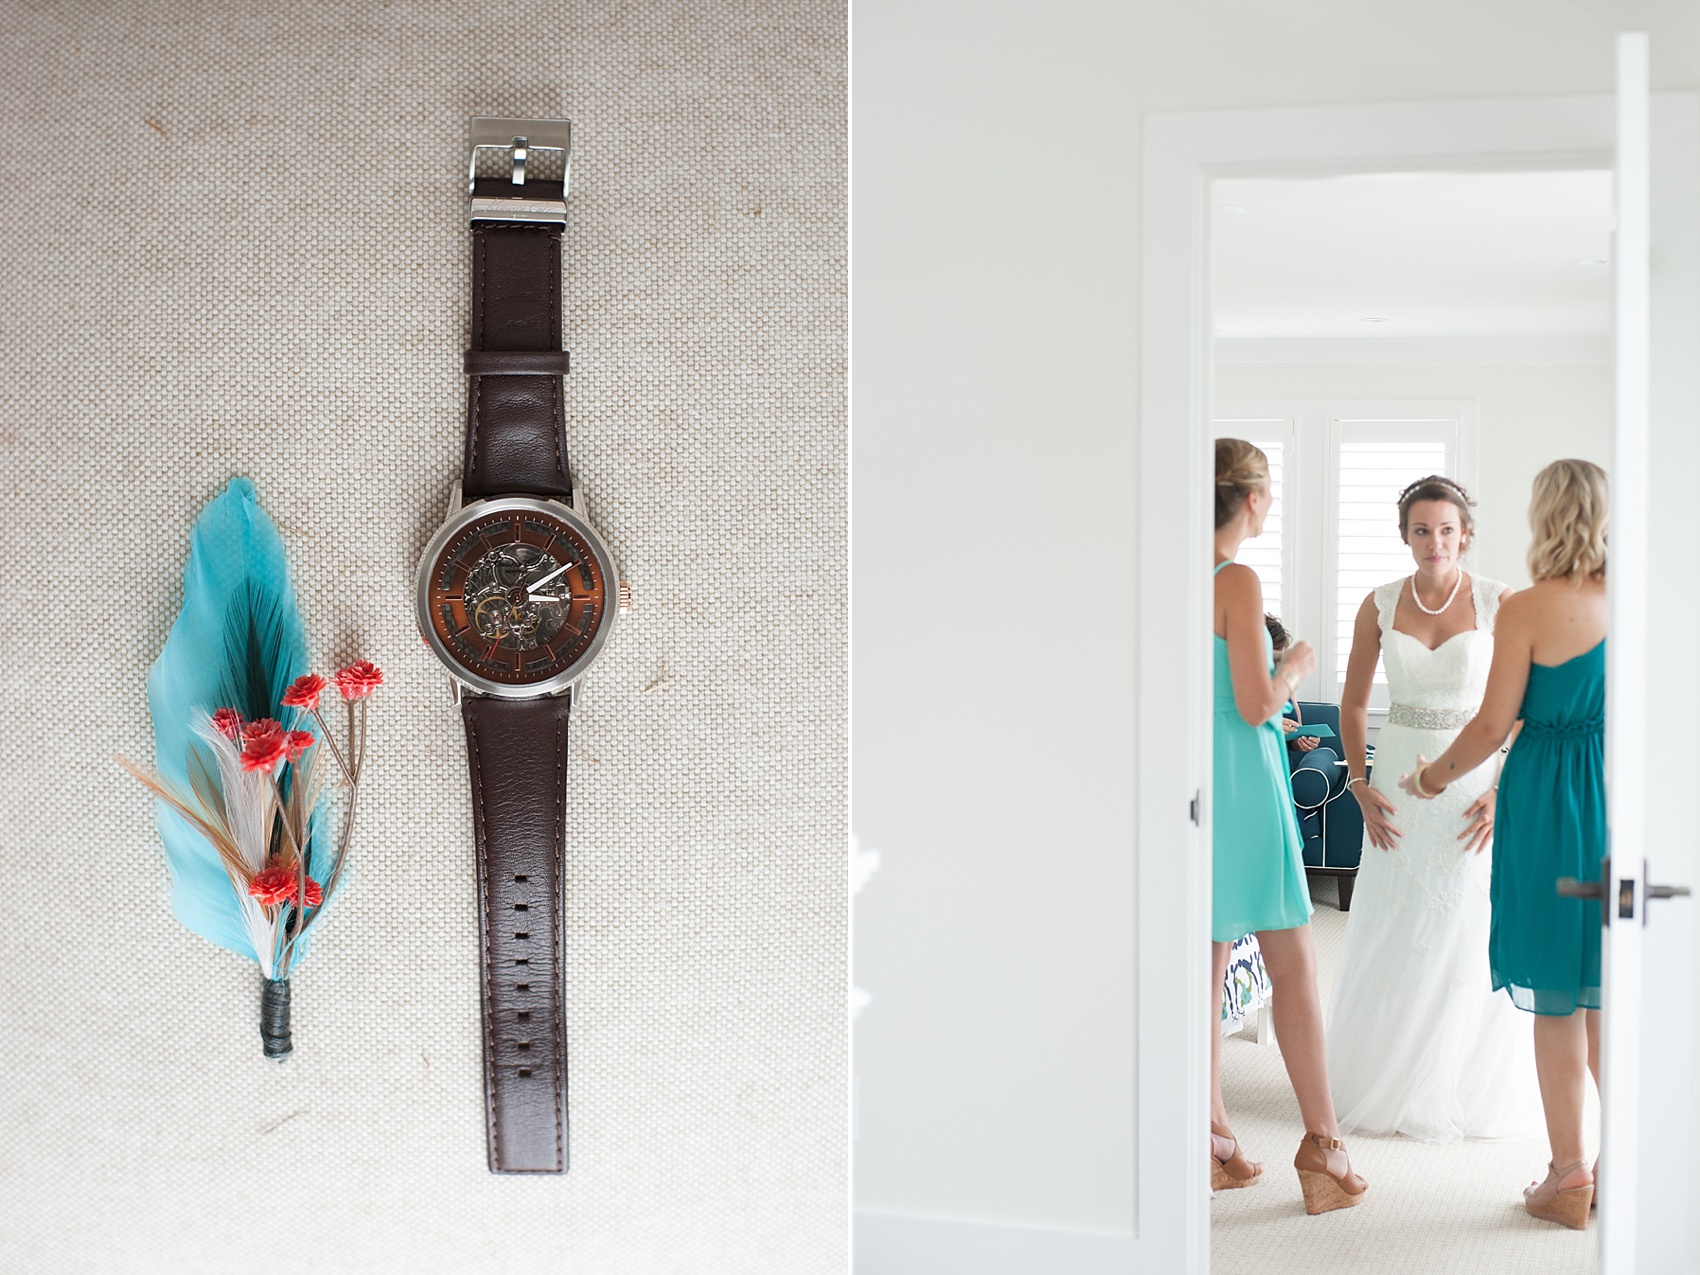 Charleston, South Carolina wedding photography. Teal dressed bridesmaids and feather boutonniere. Images by Mikkel Paige Photography.